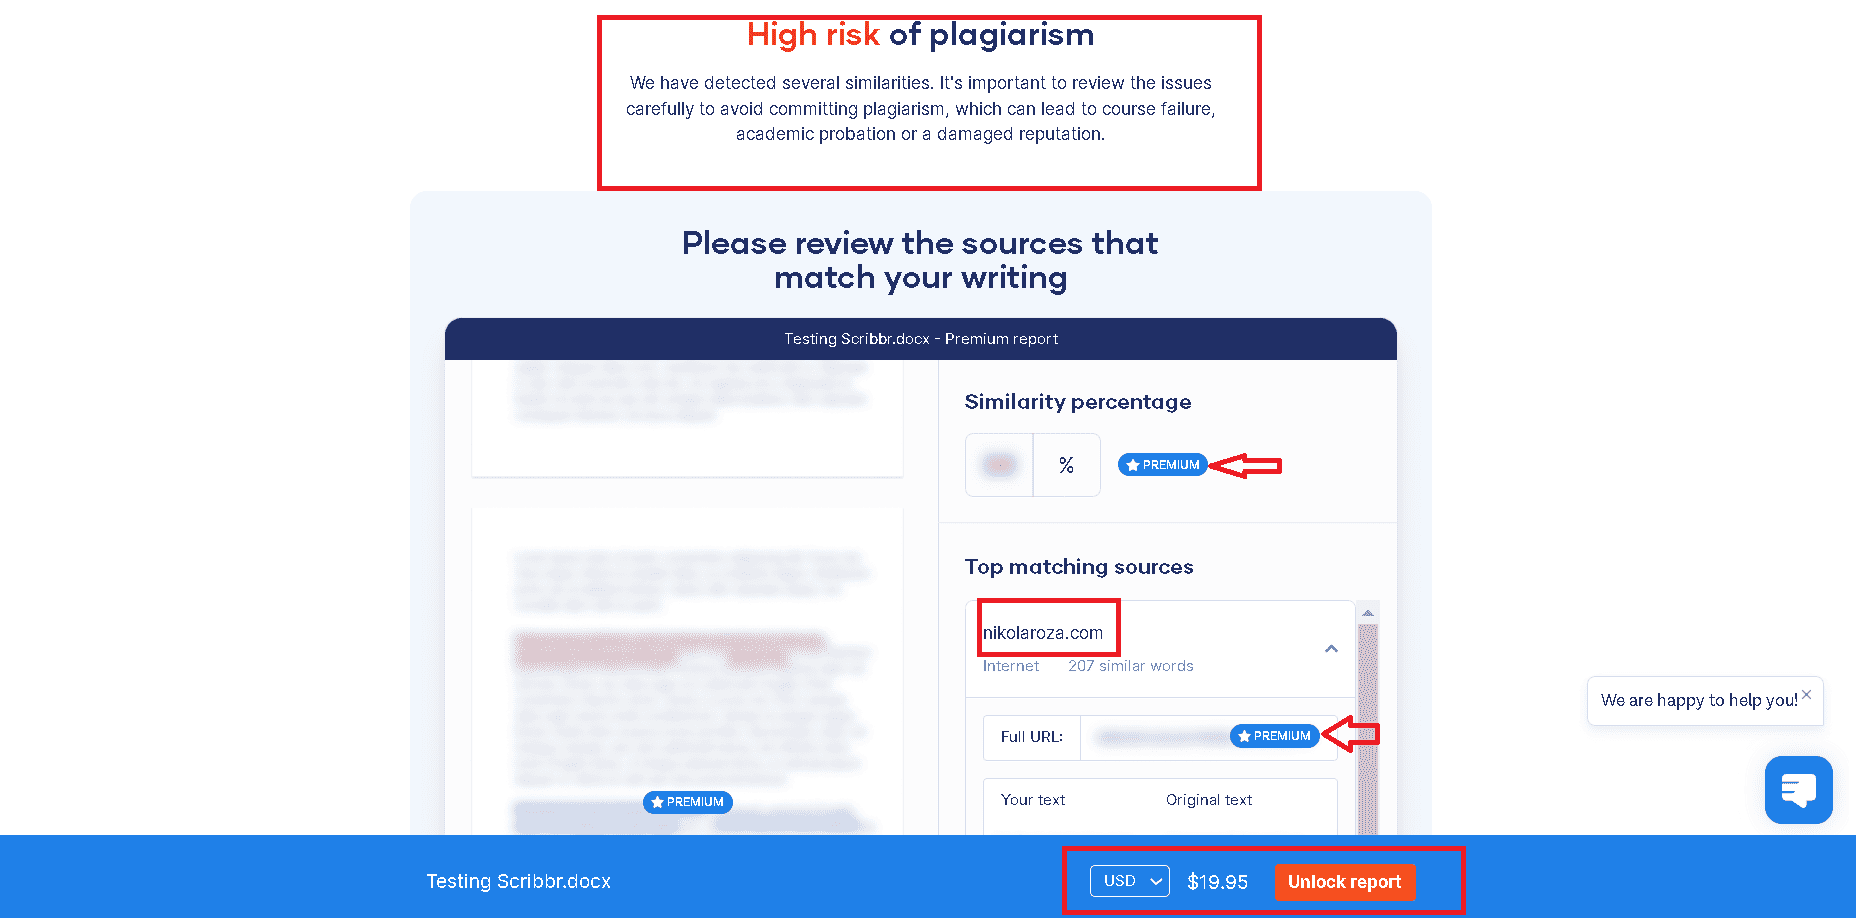 Scribbr free plagiarism checker found duplicate content on a submitted web page